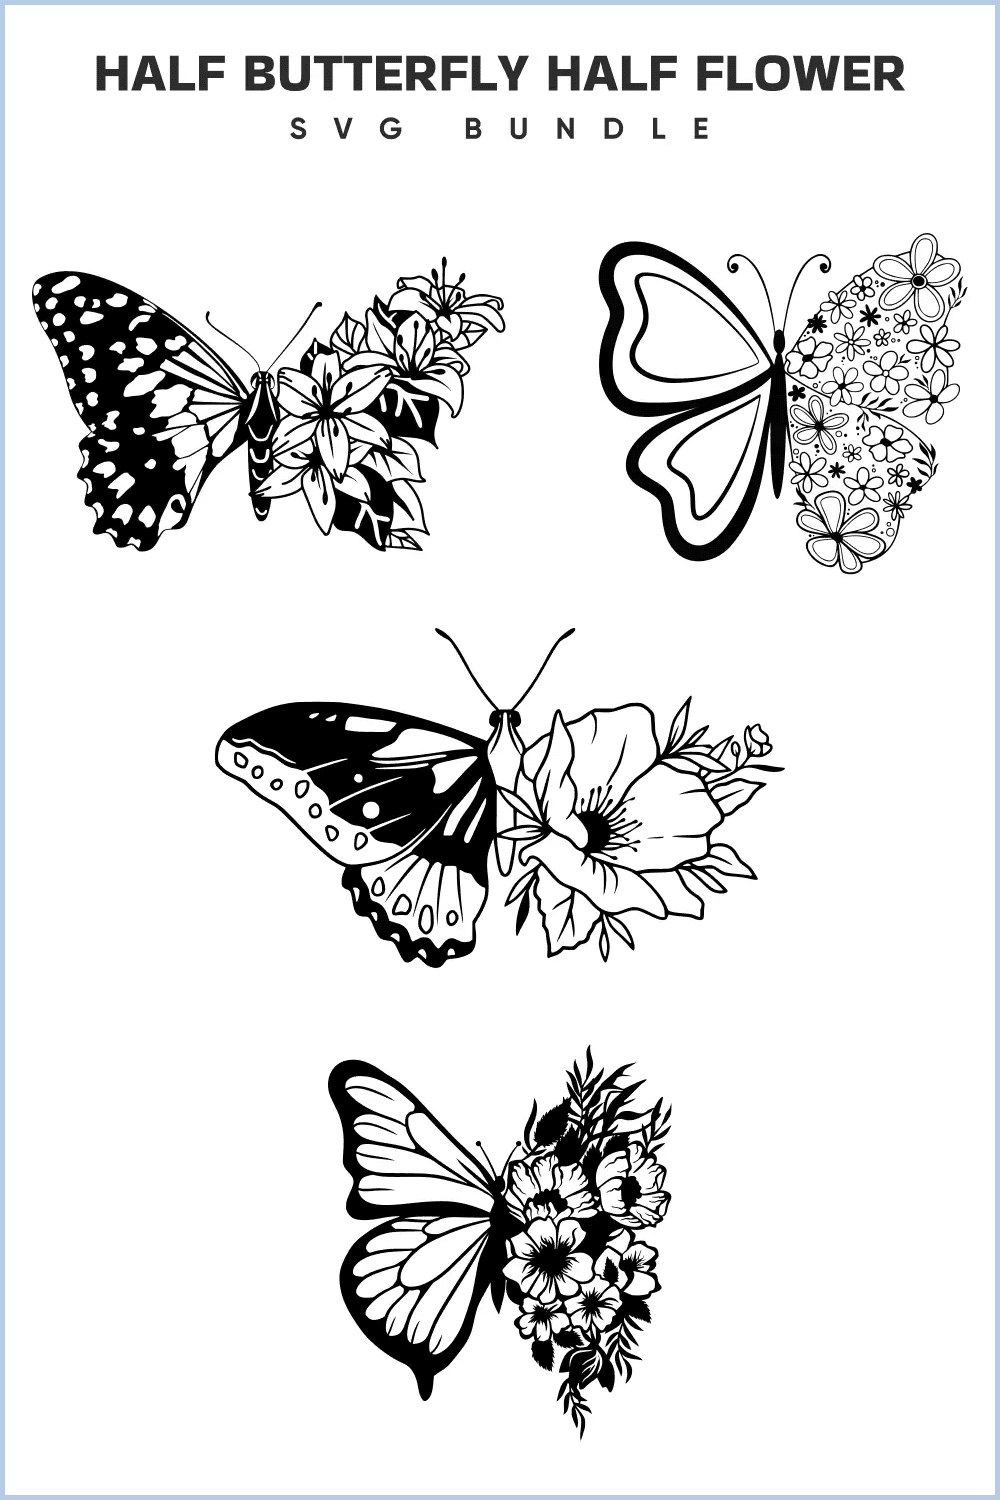 Images of 4 butterflies that consist of half flowers.